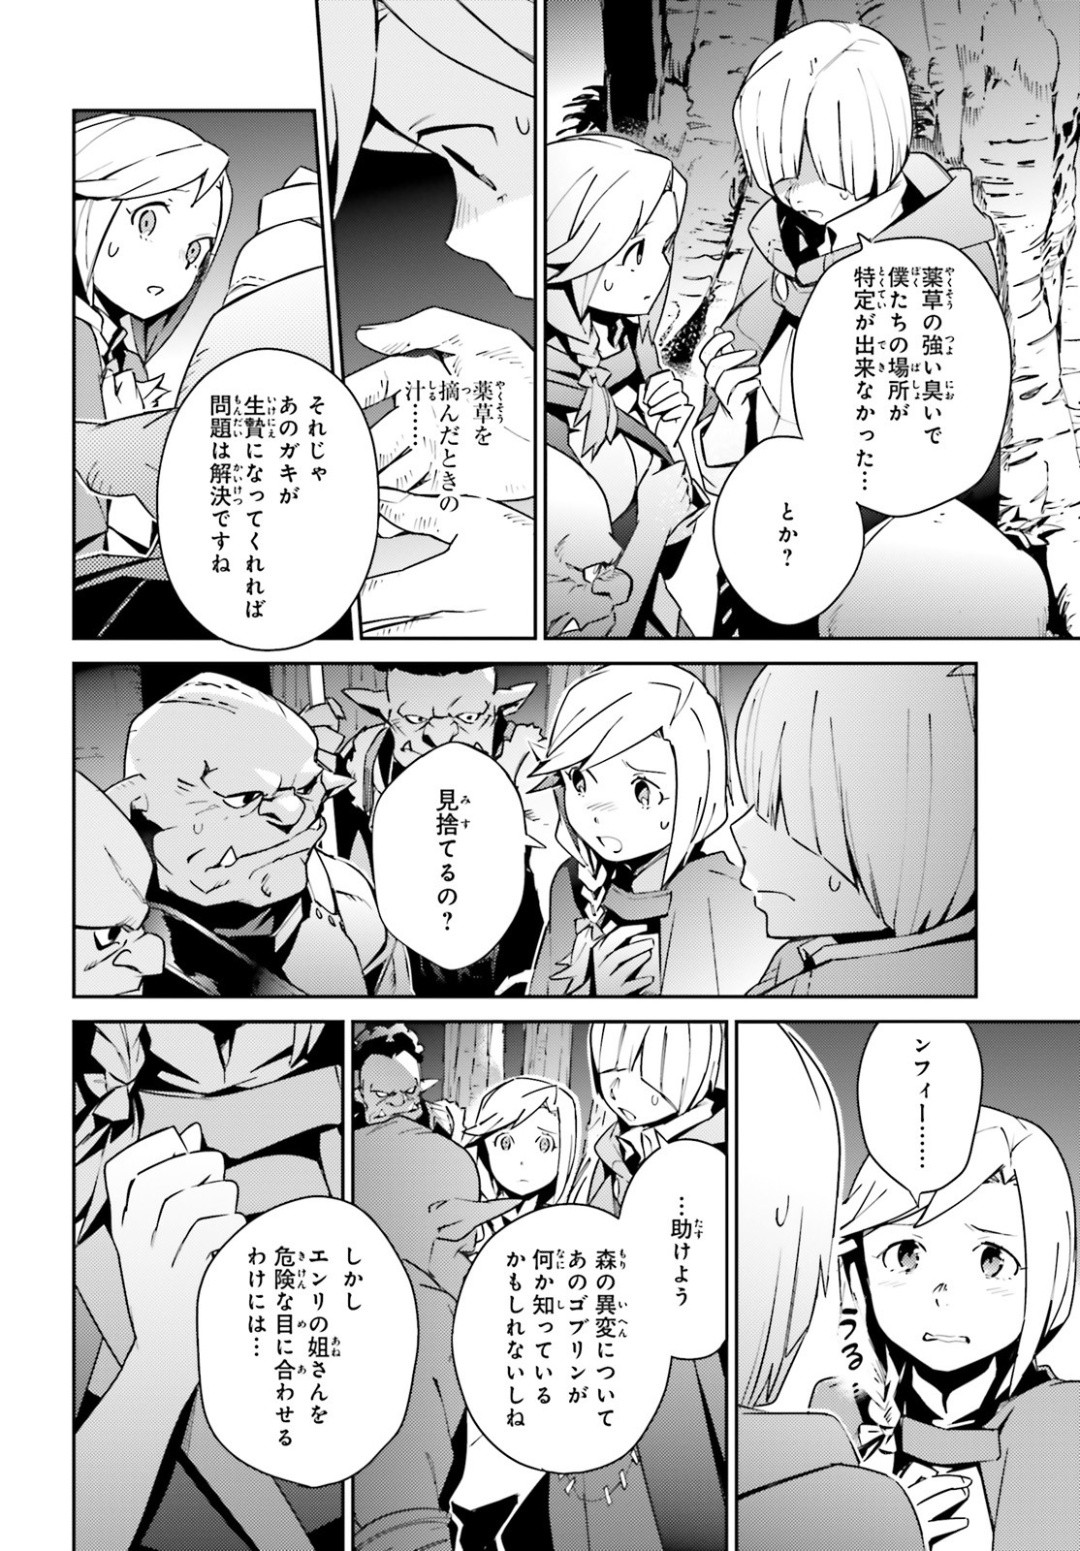 Overlord - Chapter 55 - Page 2